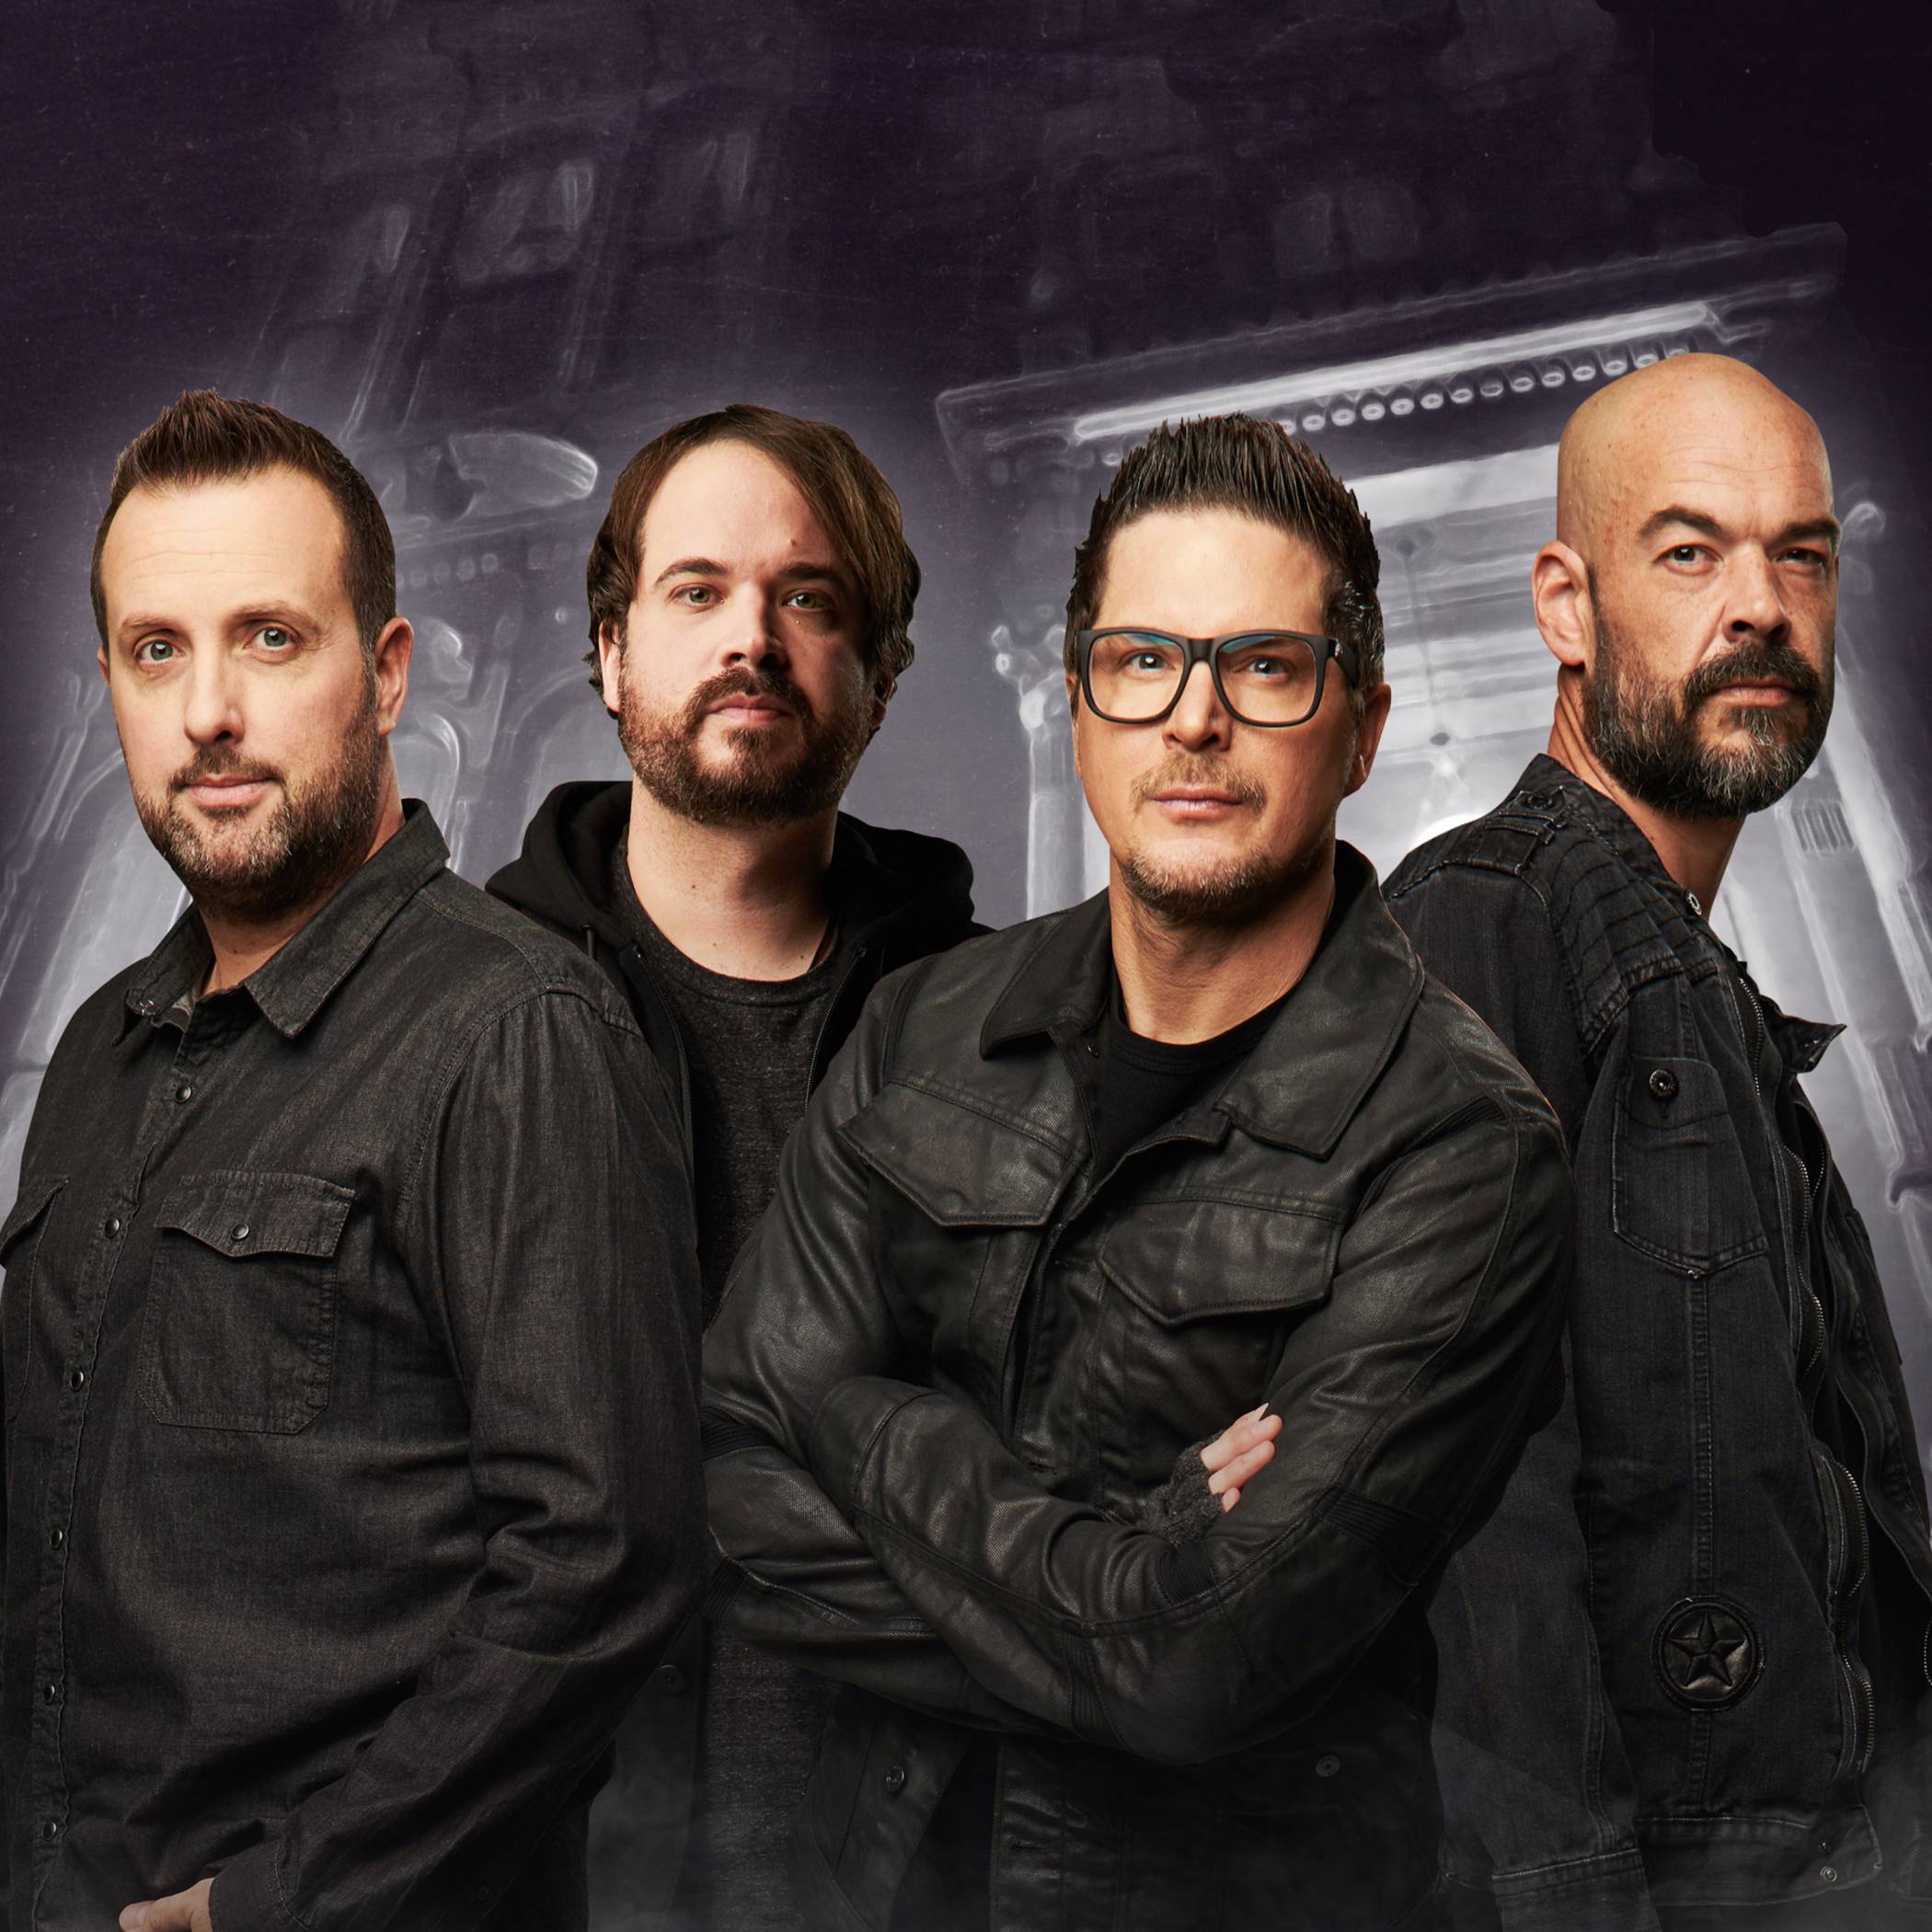 Stream Ghost Adventures Where Are They Now? discovery+